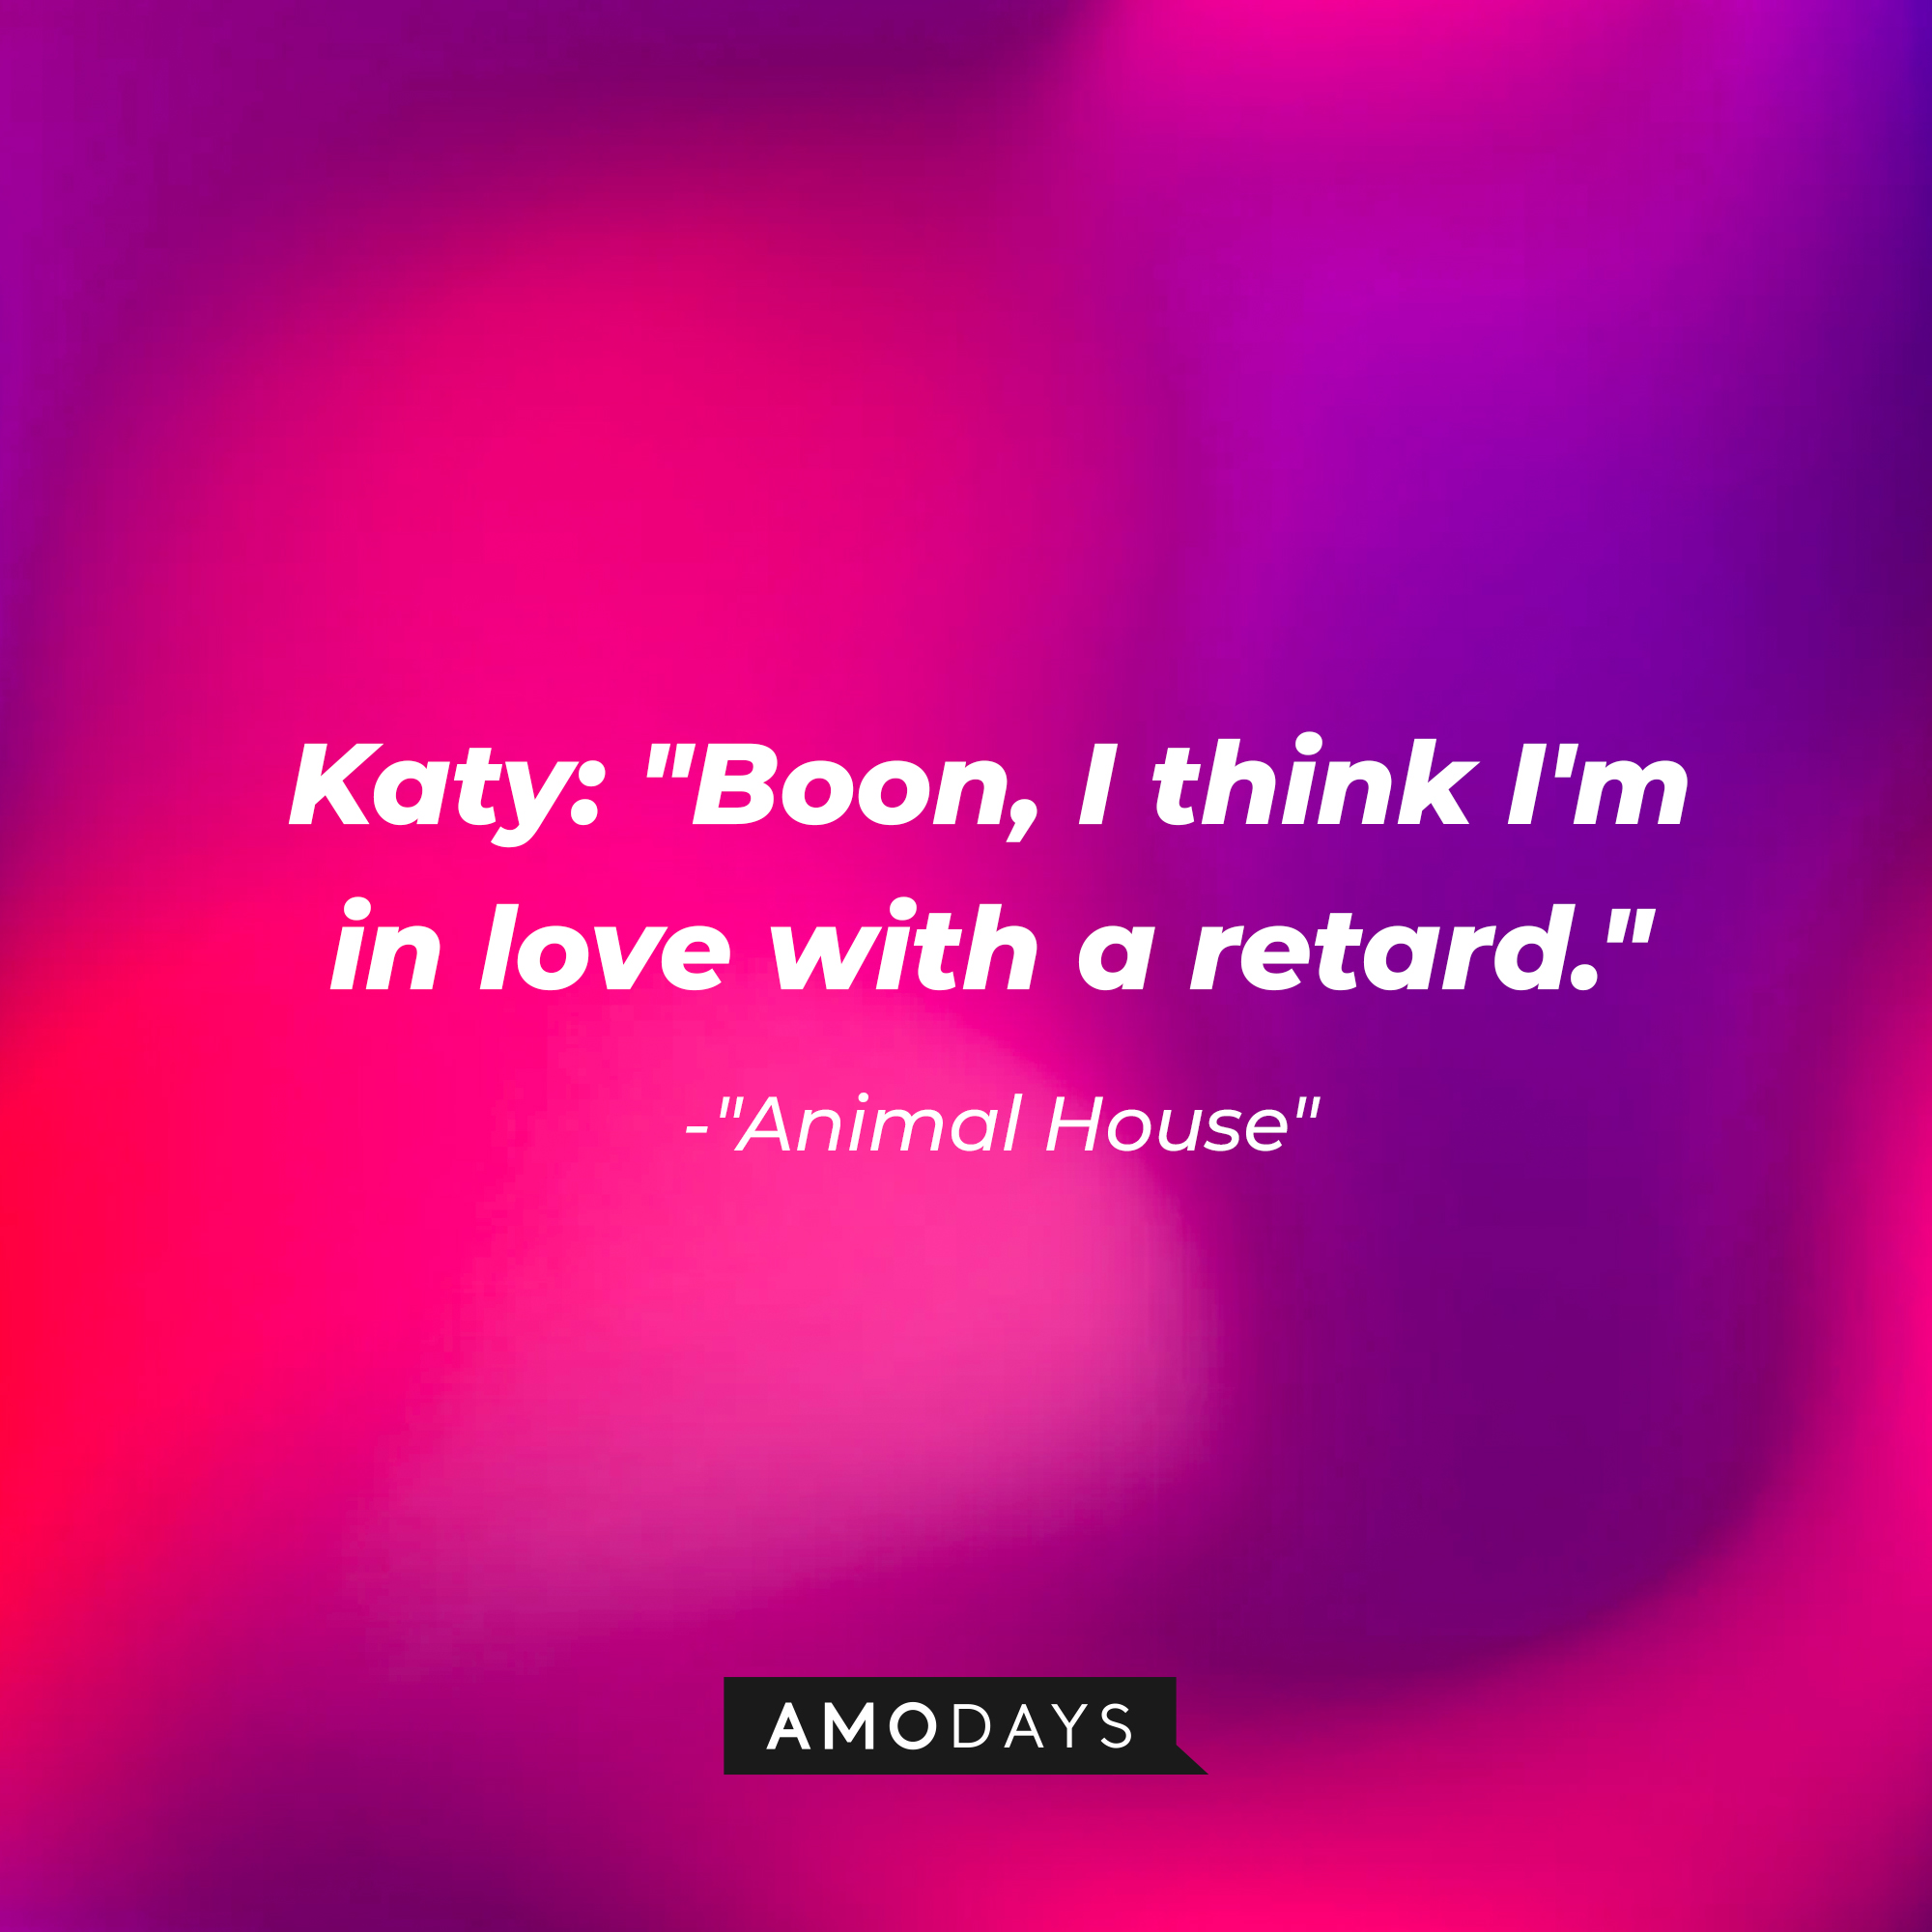 Katy's quote: "Boon, I think I'm in love with a retard." | Source: Amodays